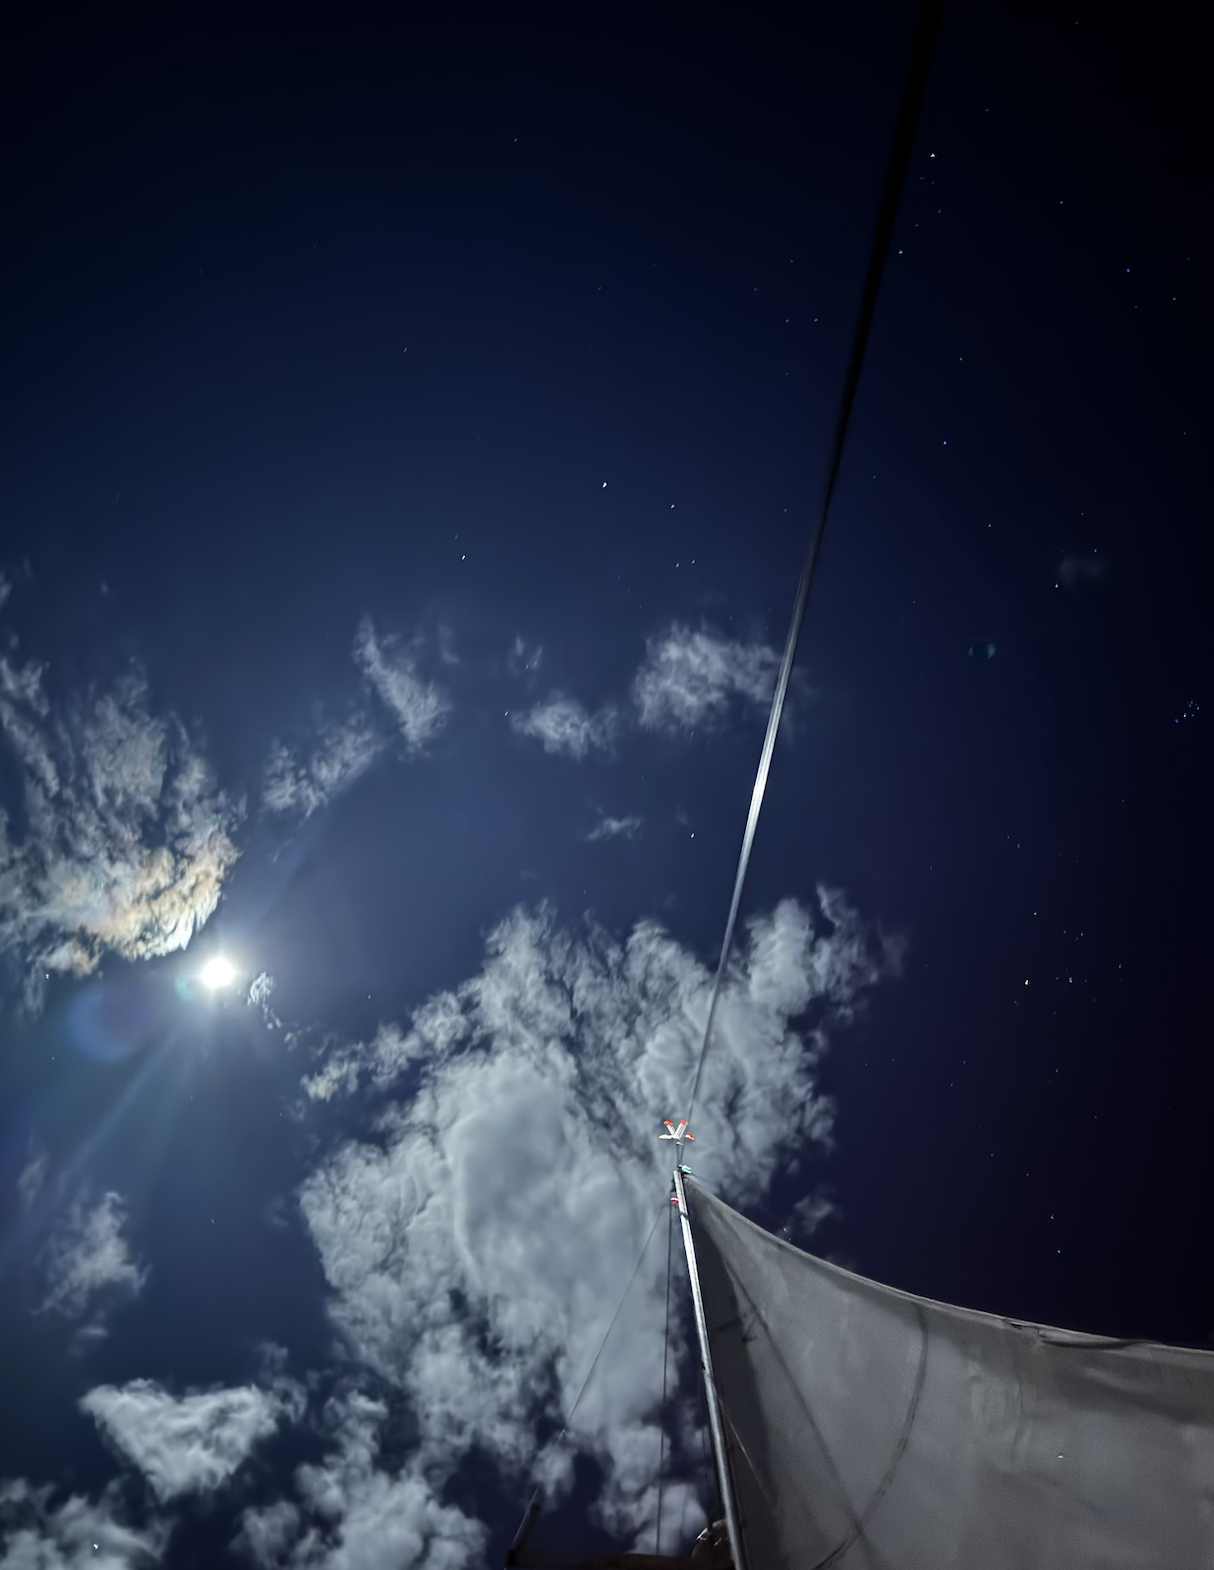 stars in the sky while sailing under the full moon